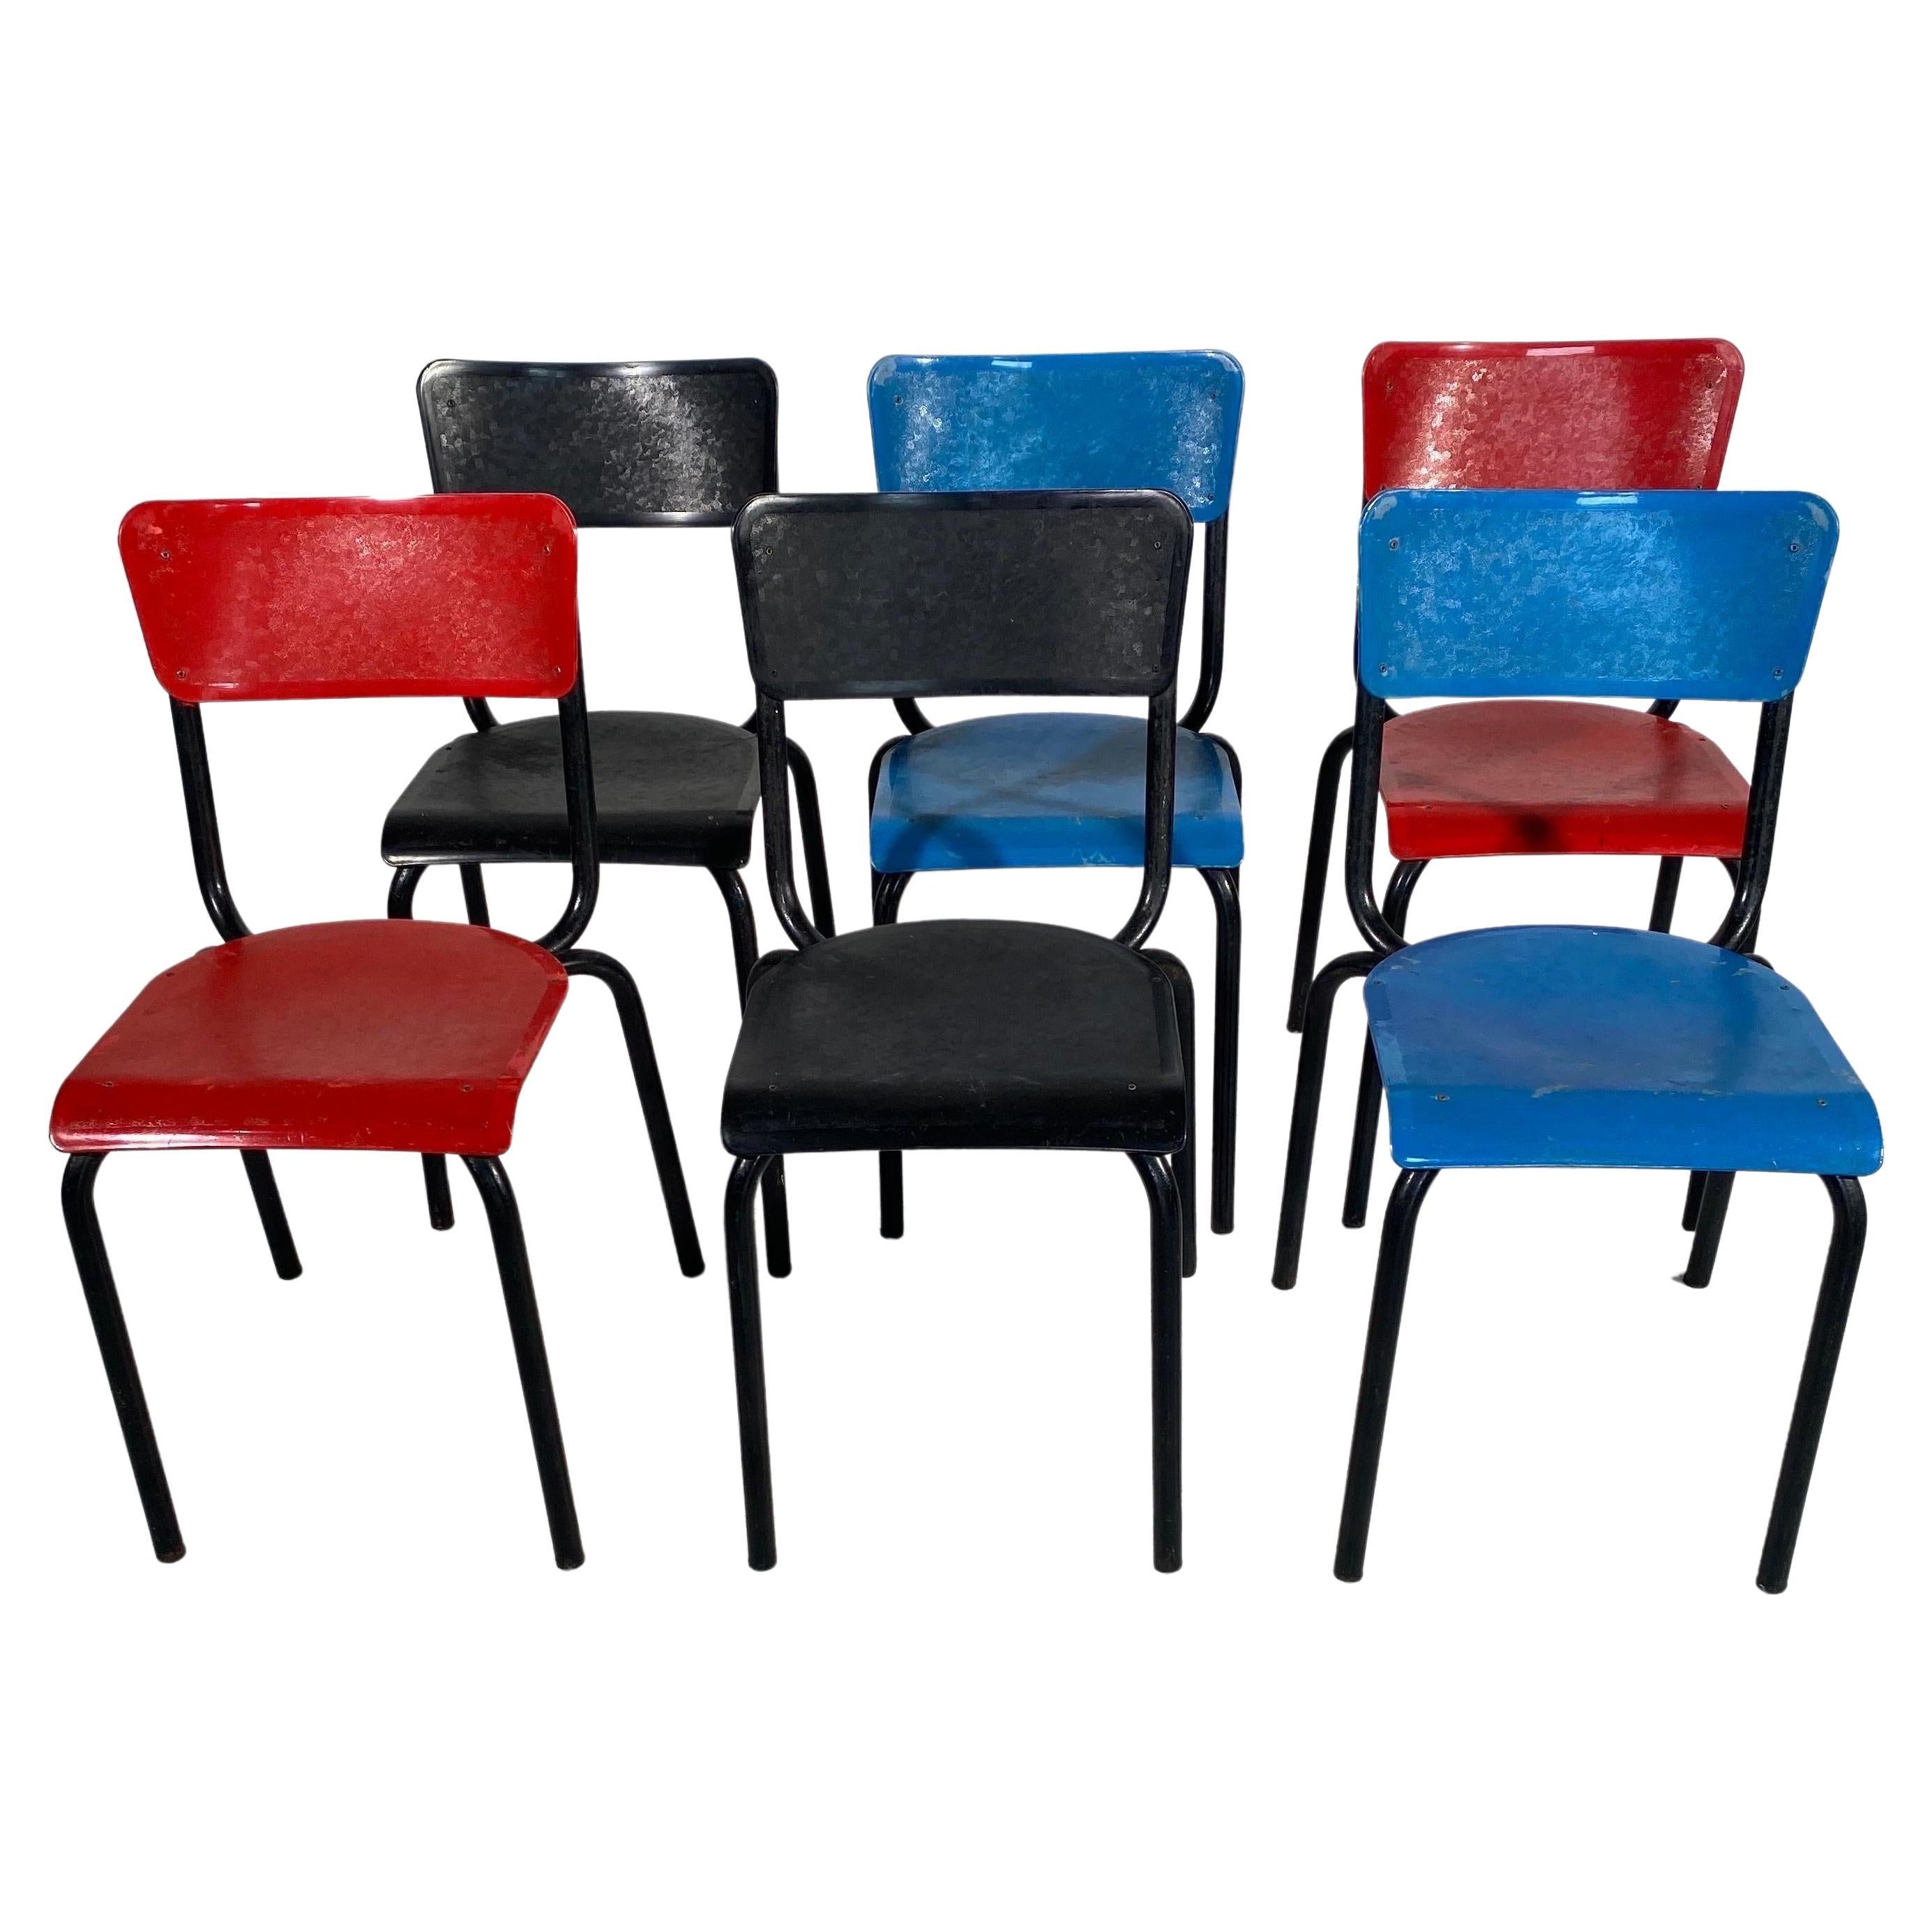 Guarich for Meurop set of Six Stacking Chairs, 
Red, Blue and Black,
1960s
